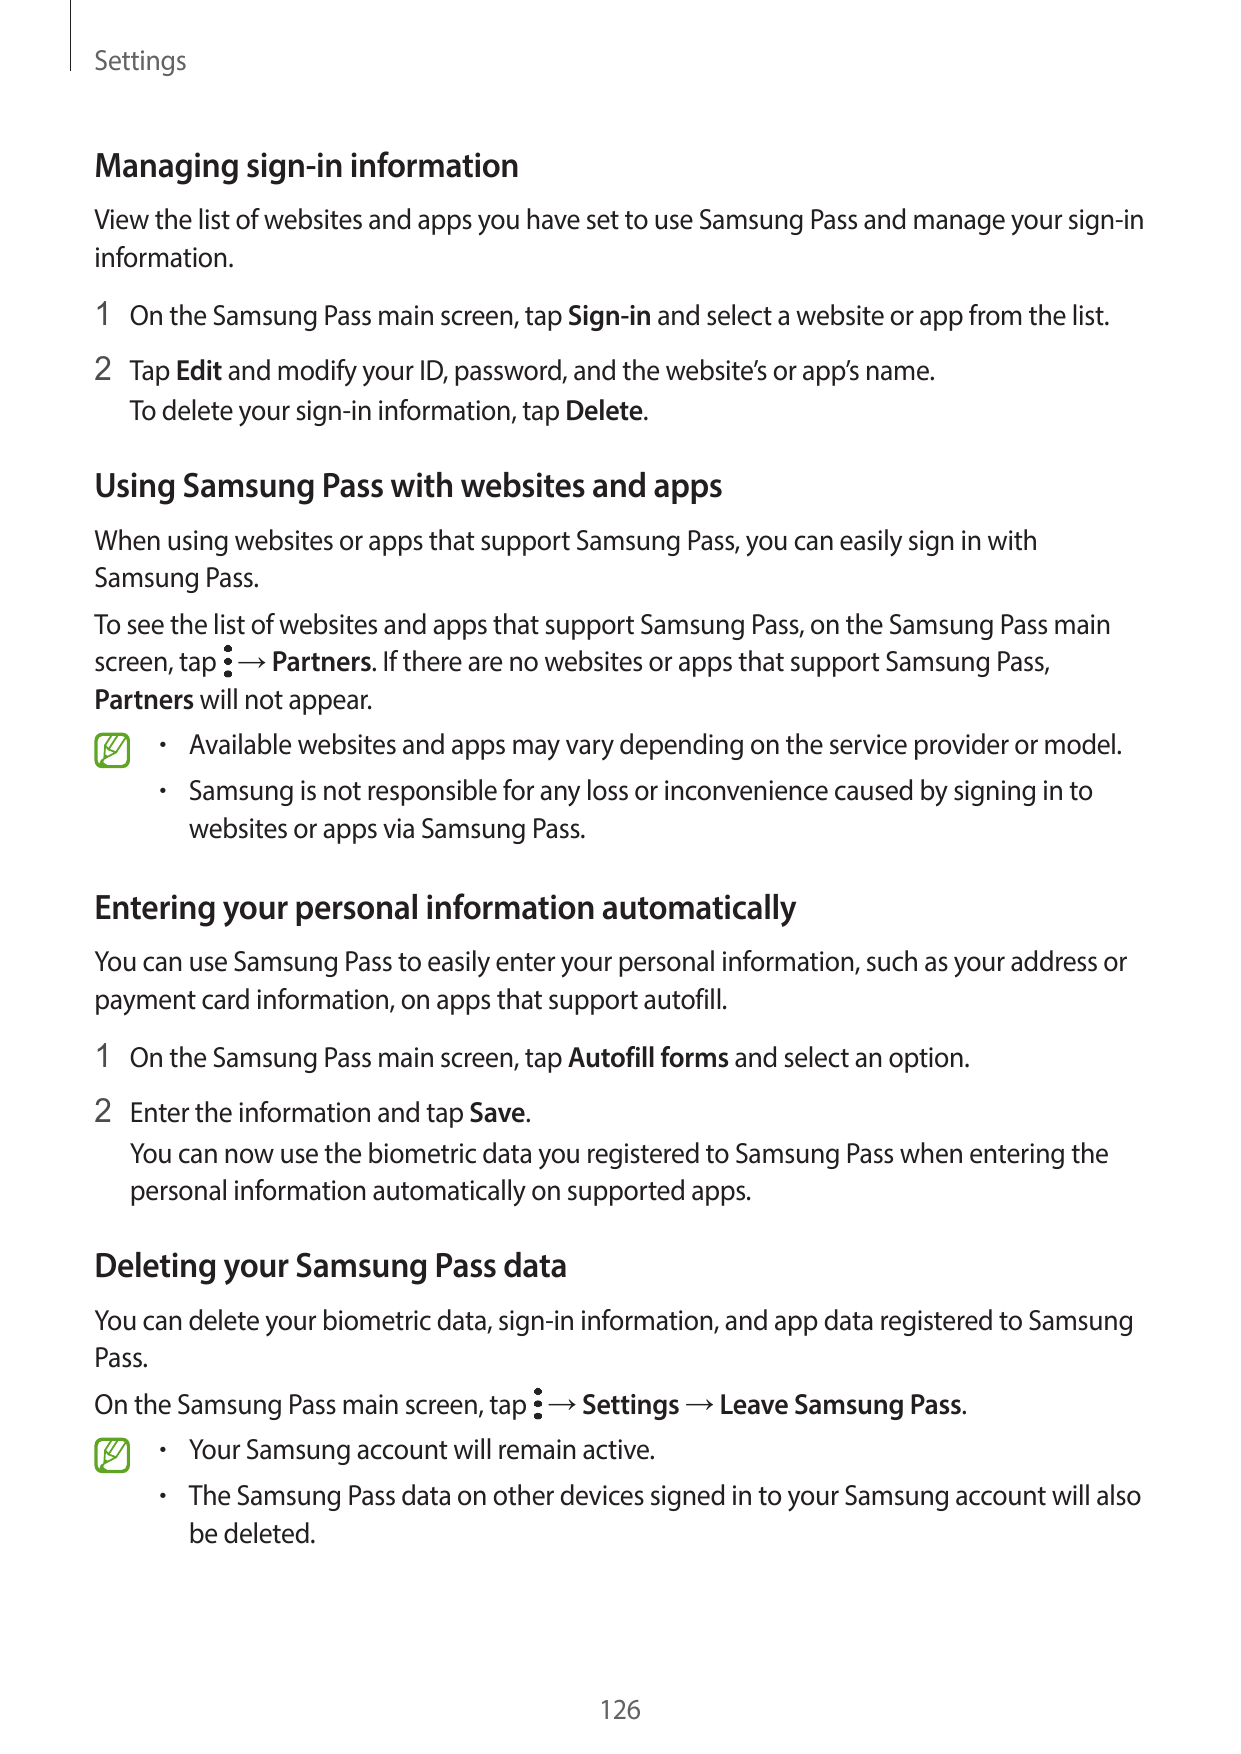 SettingsManaging sign-in informationView the list of websites and apps you have set to use Samsung Pass and manage your sign-ini